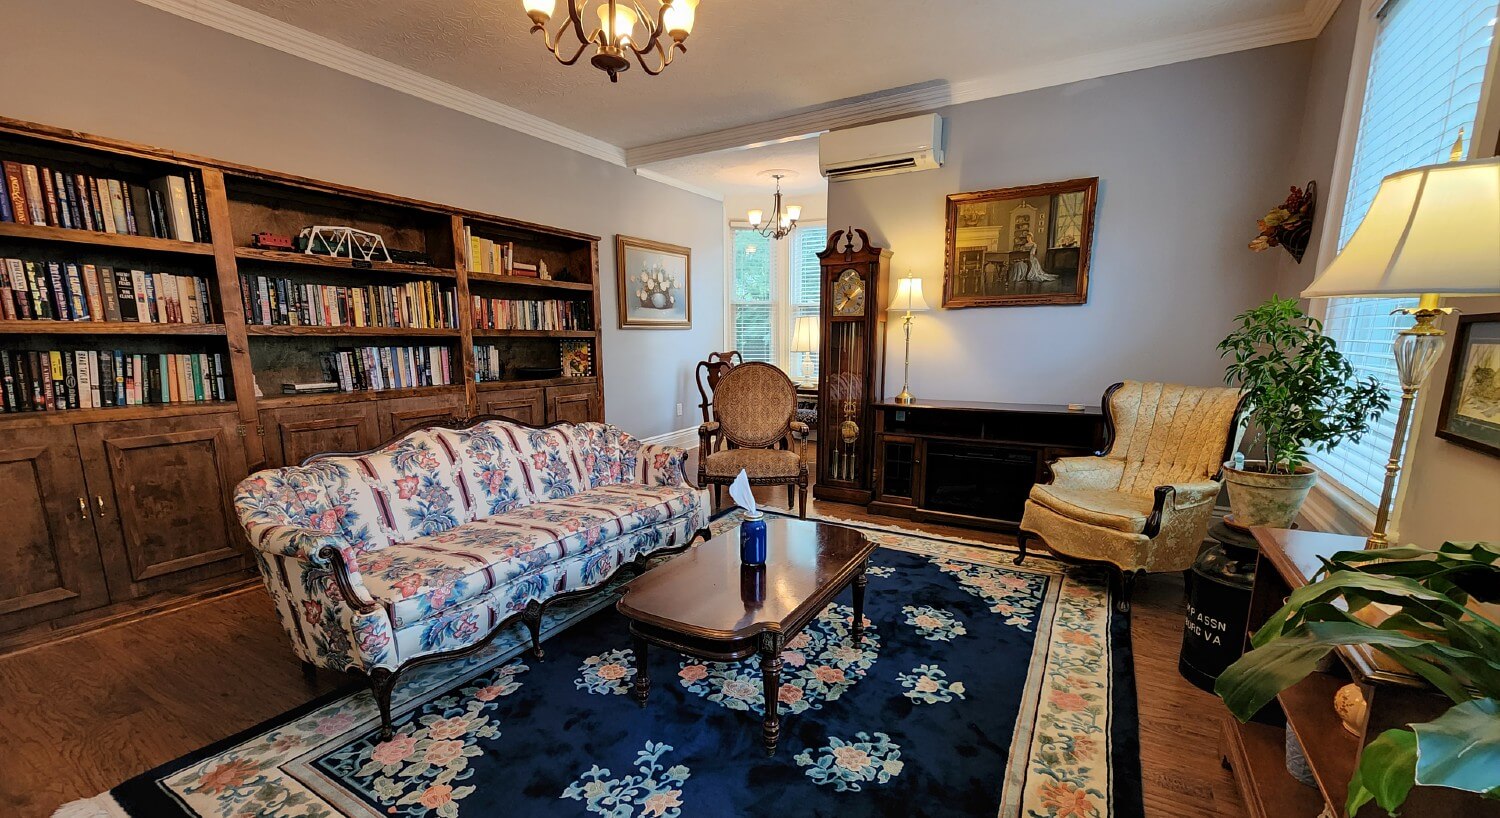 Reading room of a home with floral couch, antique chairs and wall of built-ins filled with books